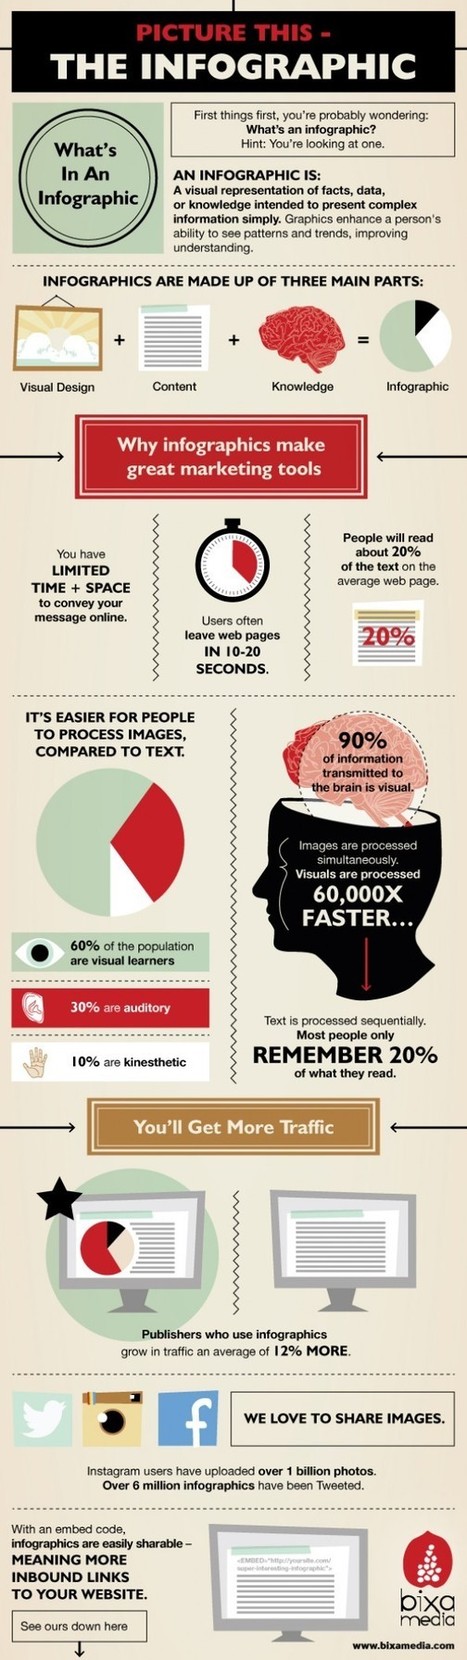 An Infographic About Infographics | :: The 4th Era :: | Scoop.it